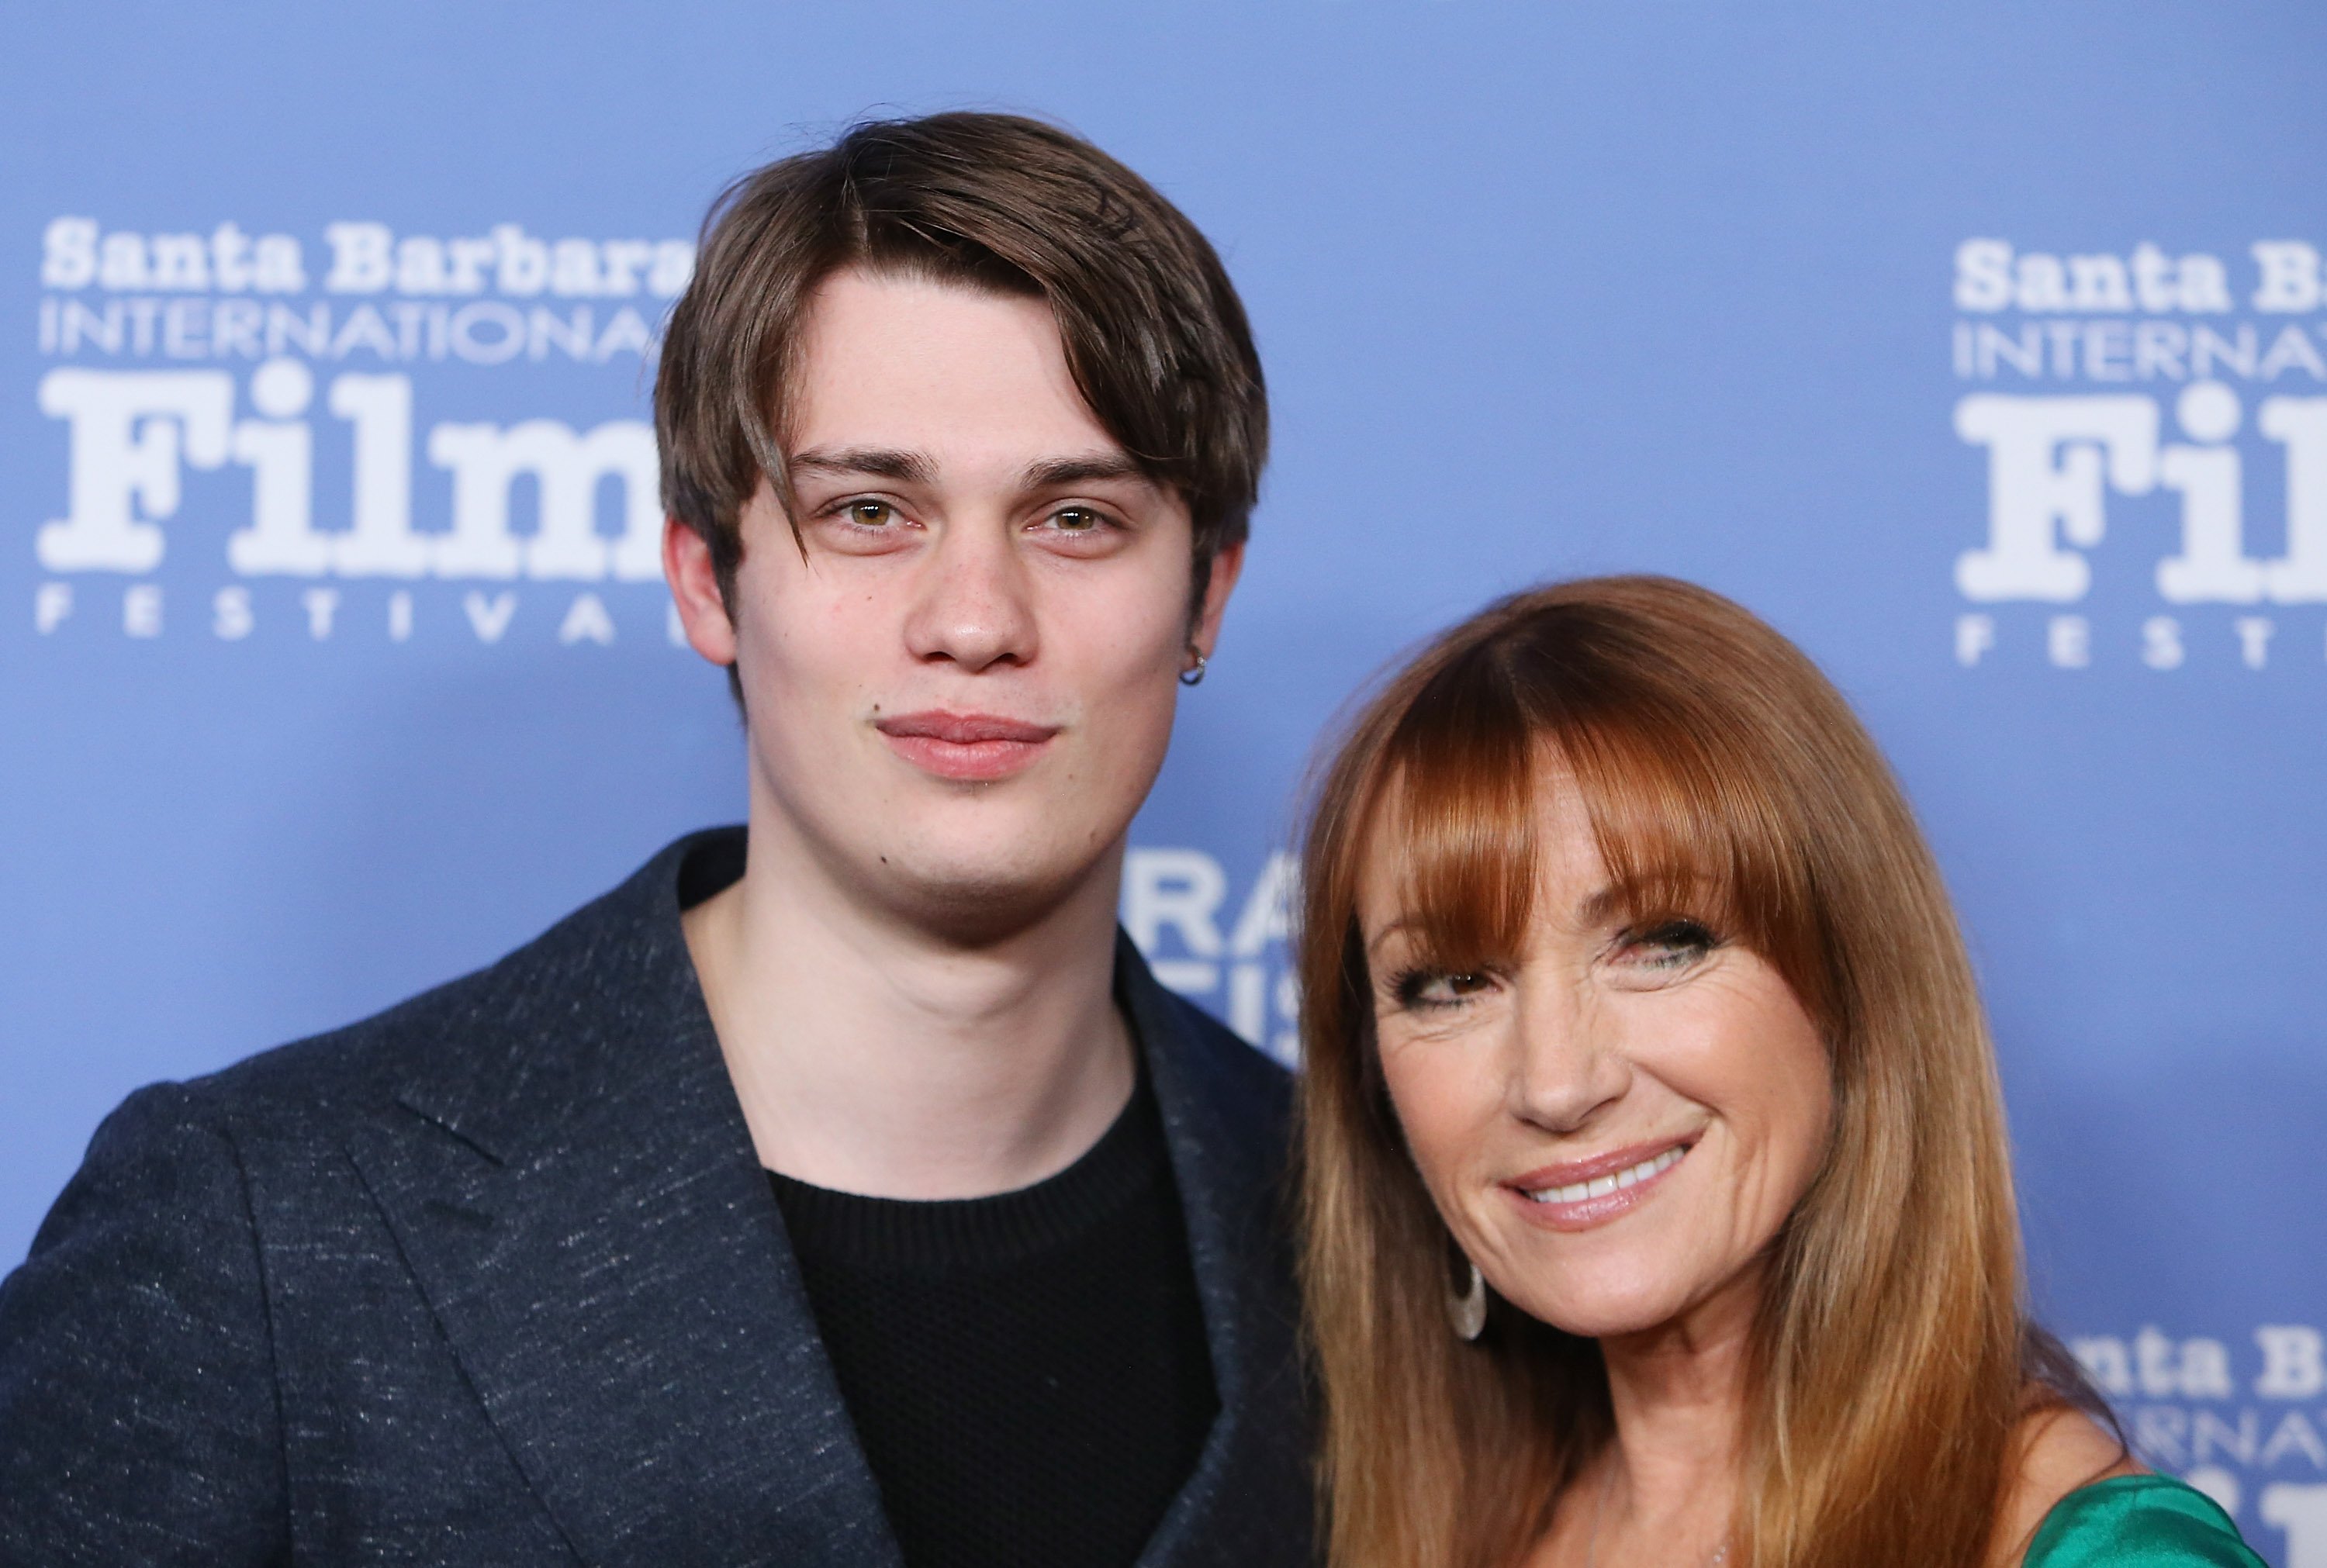 Actress Jane Seymour and son Kristopher Steven Keach at Arlington Theatre on February 6, 2016 in Santa Barbara, California. | Source: Getty Images